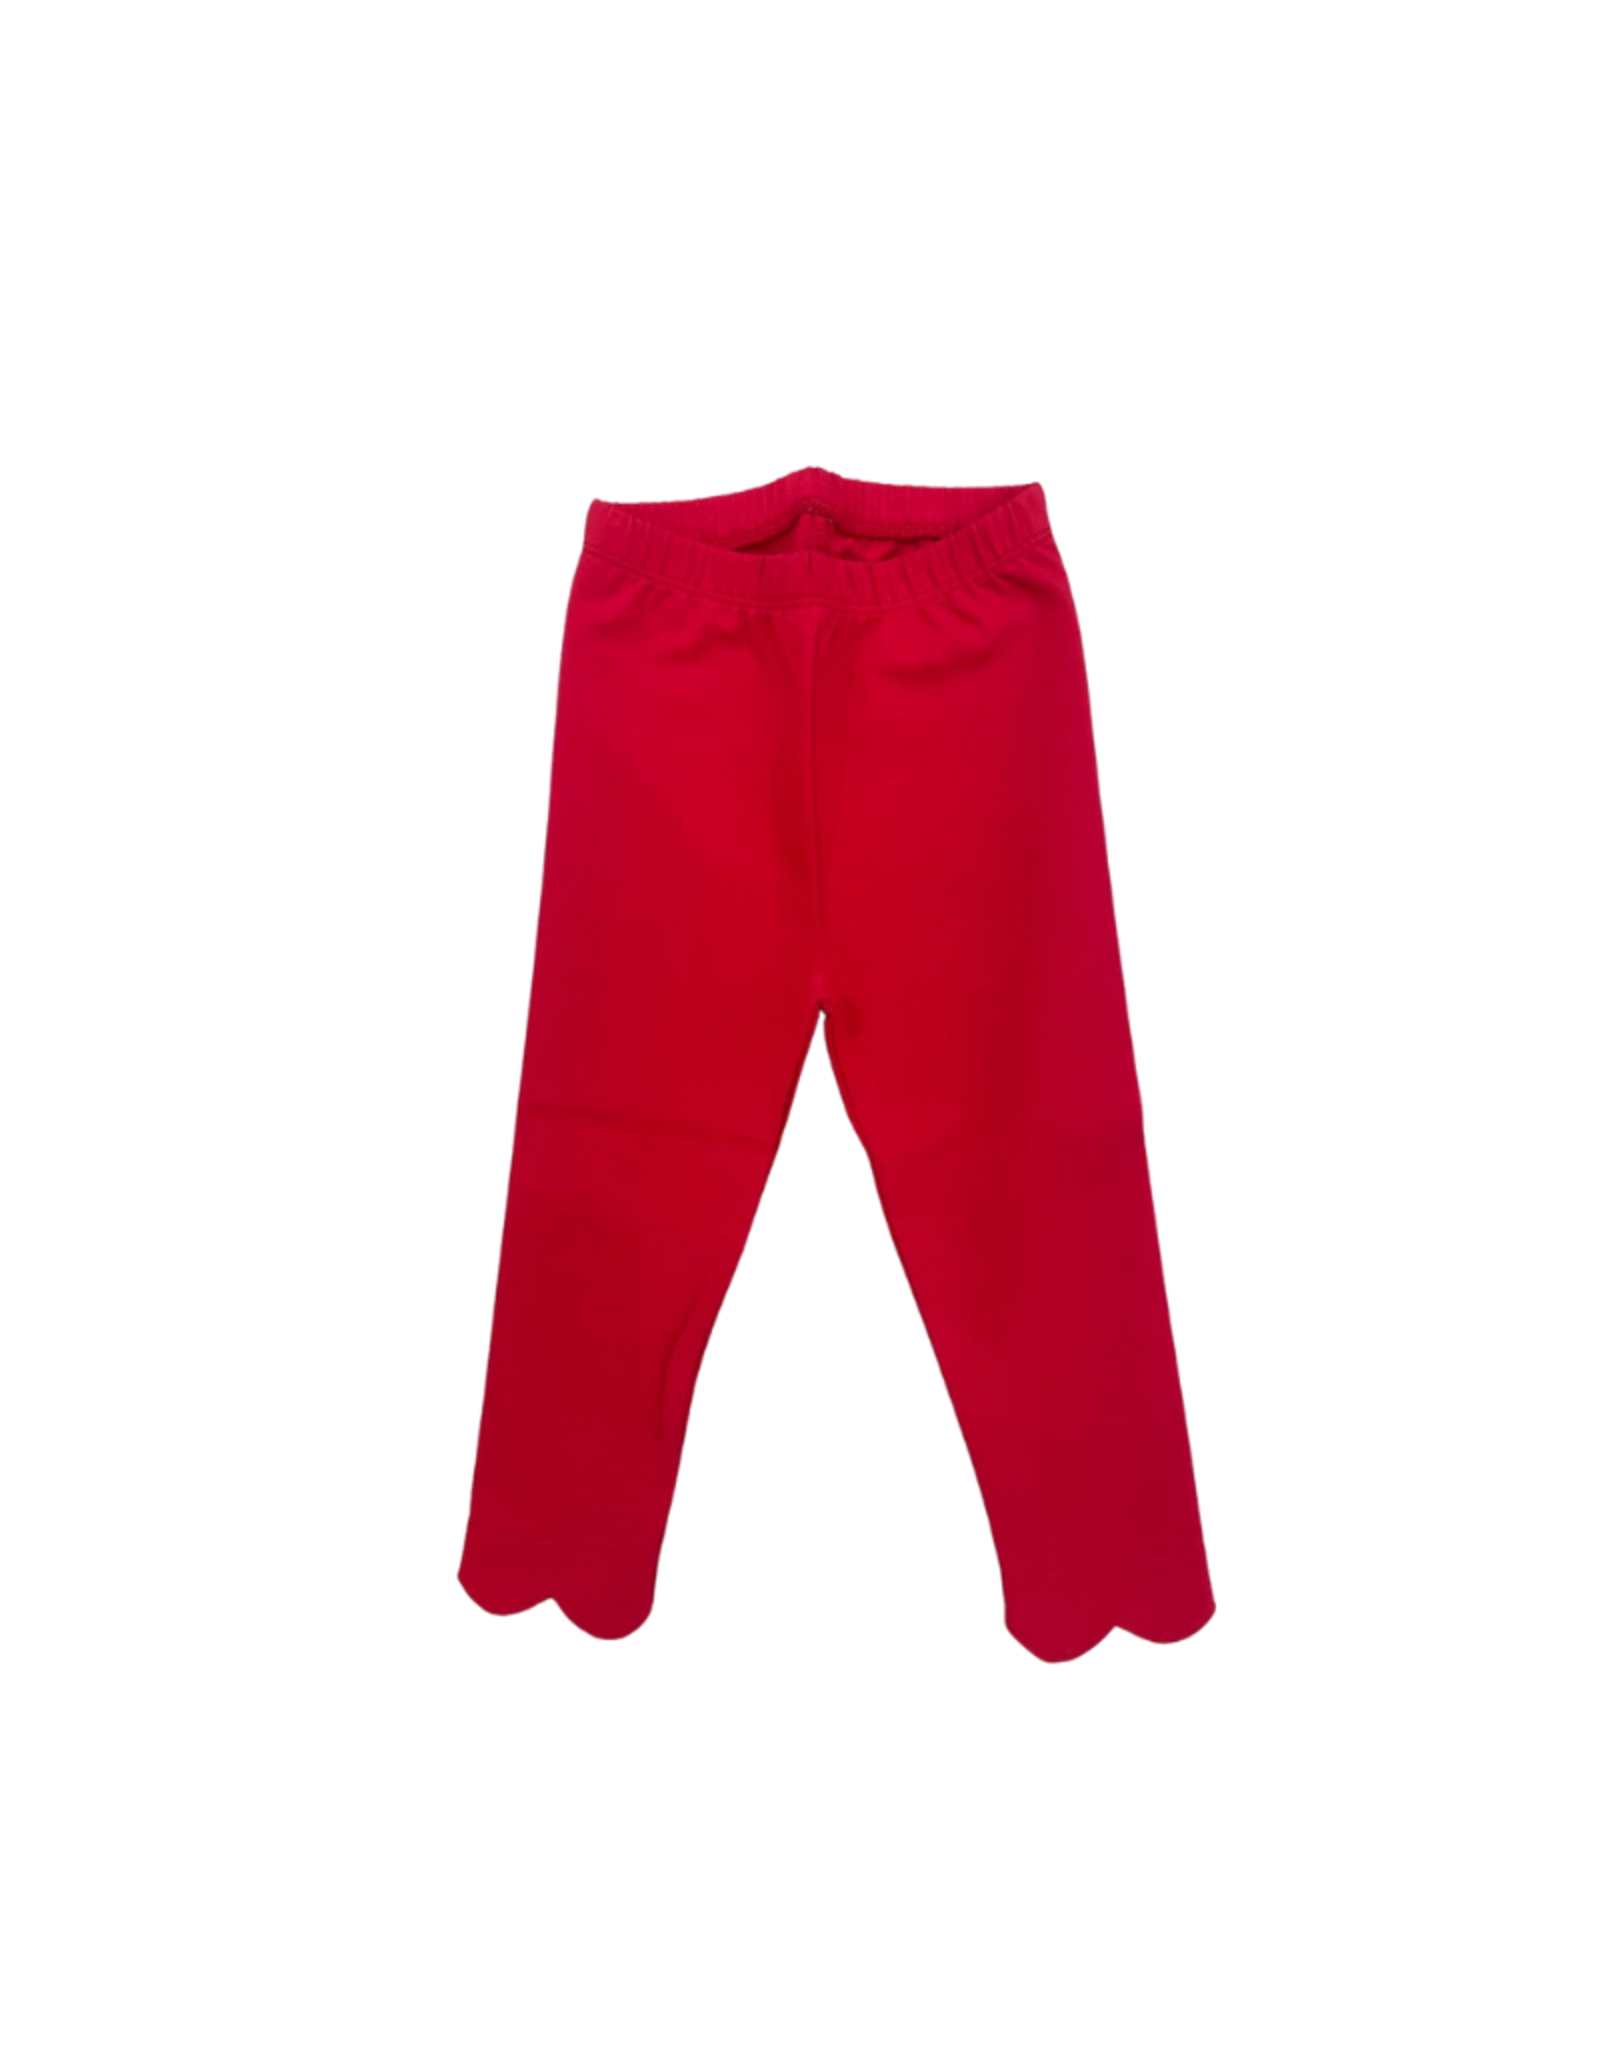 James and Lottie Red Pima Knit Leggings